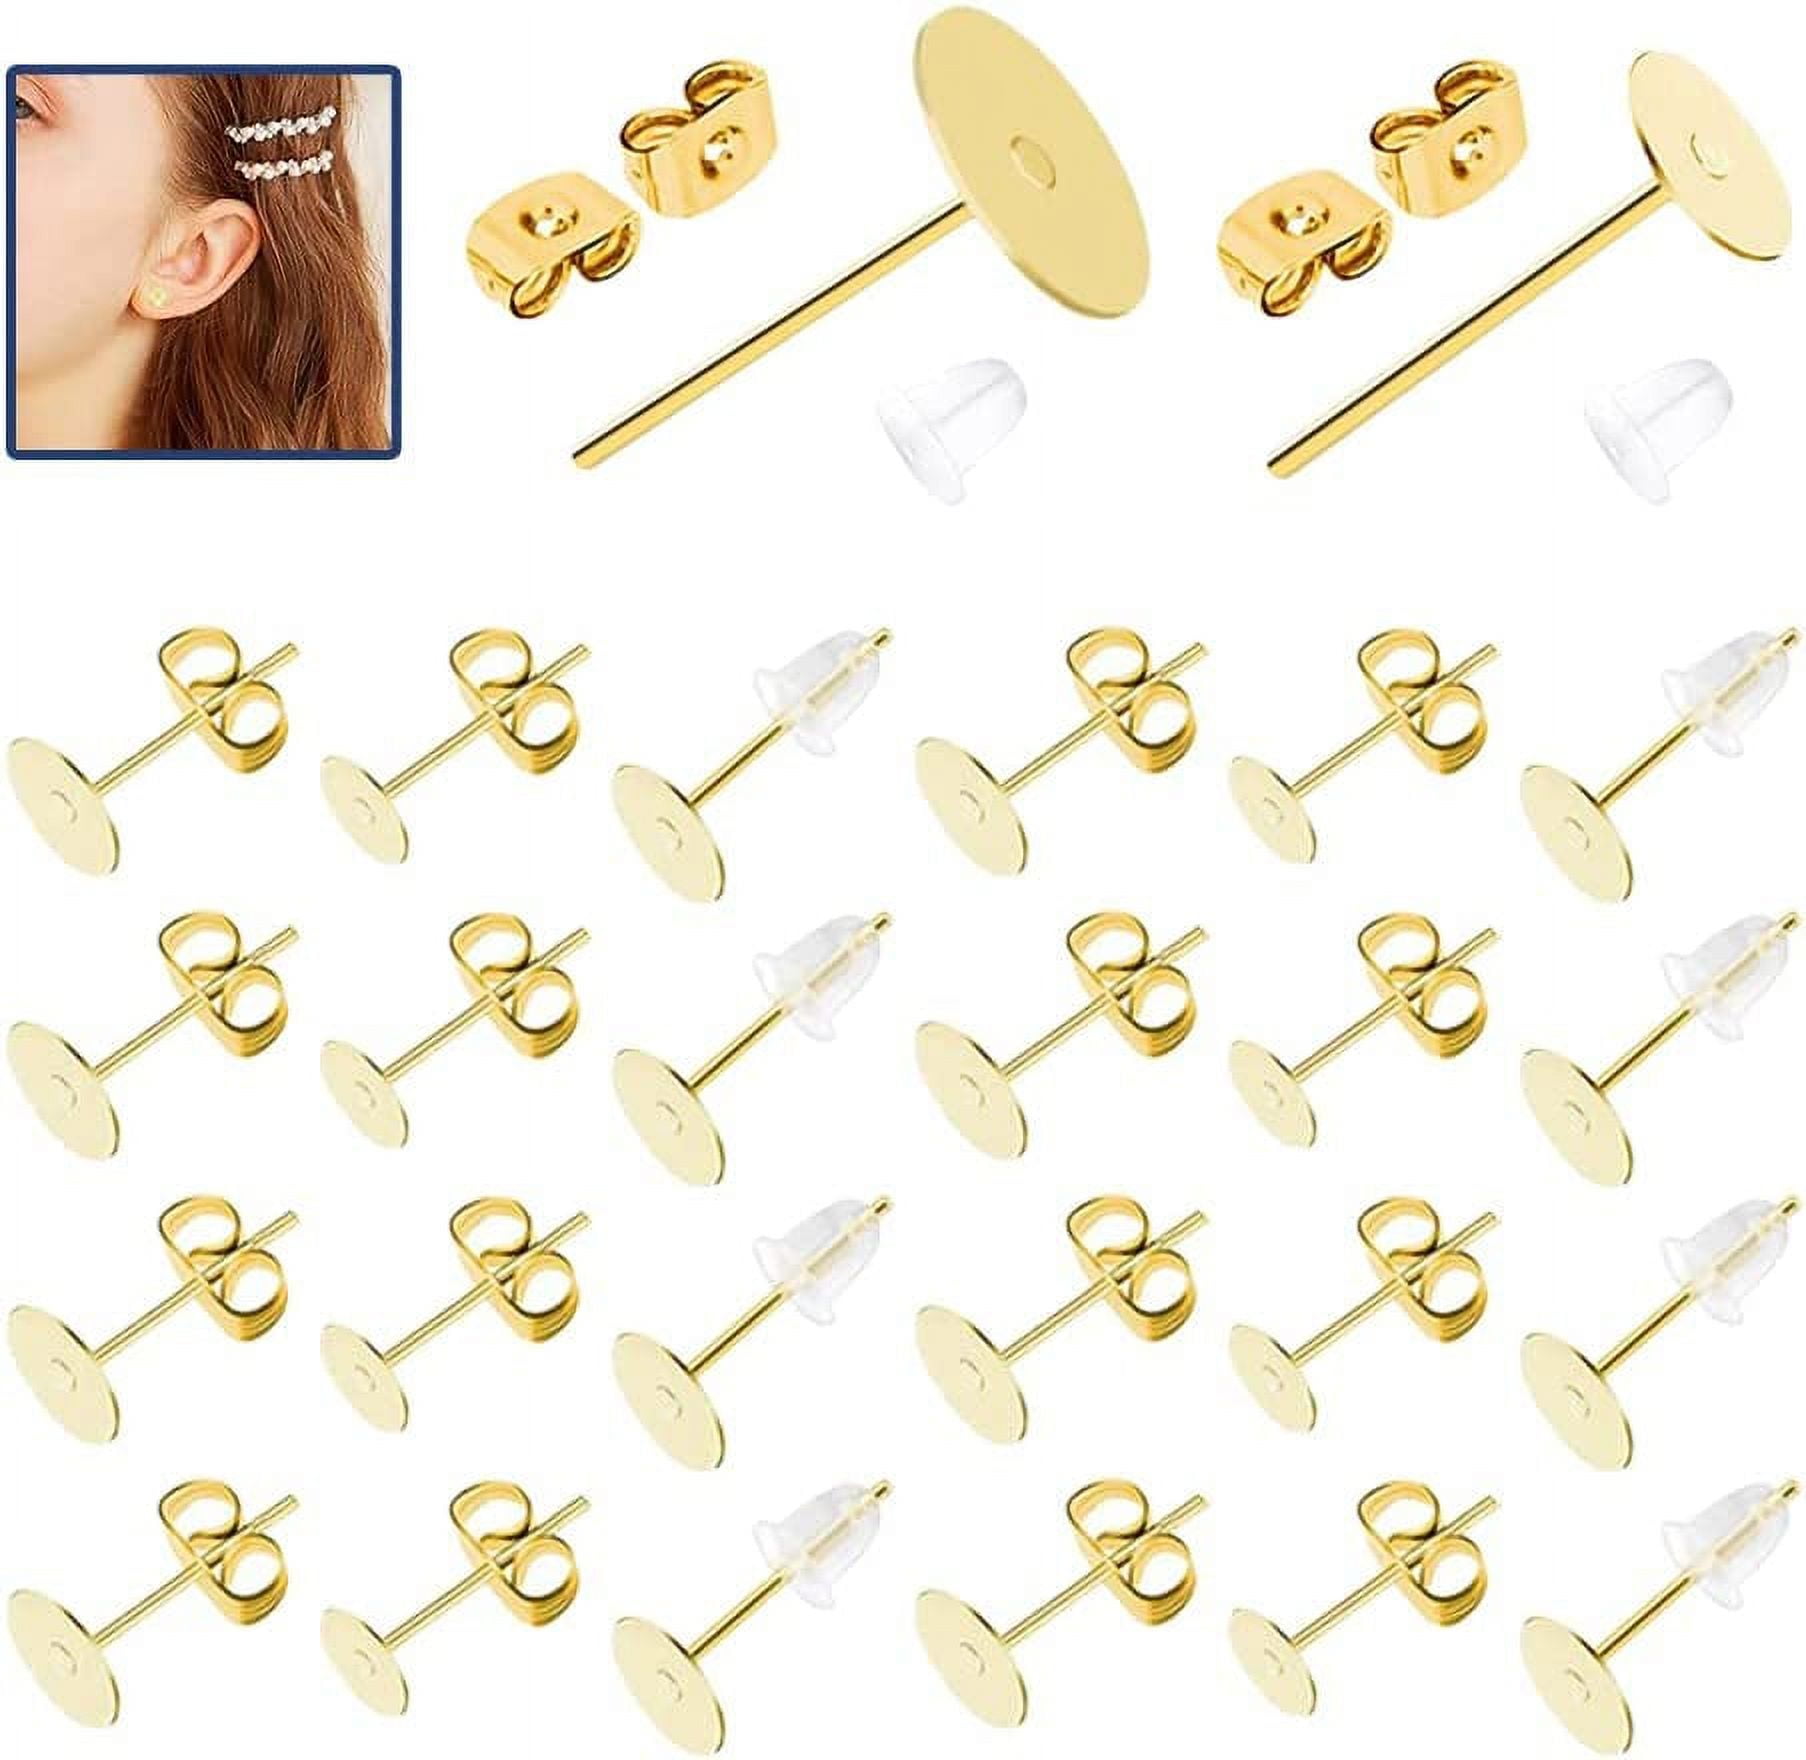  100pcs Ball Earring Studs with 100pcs Butterfly